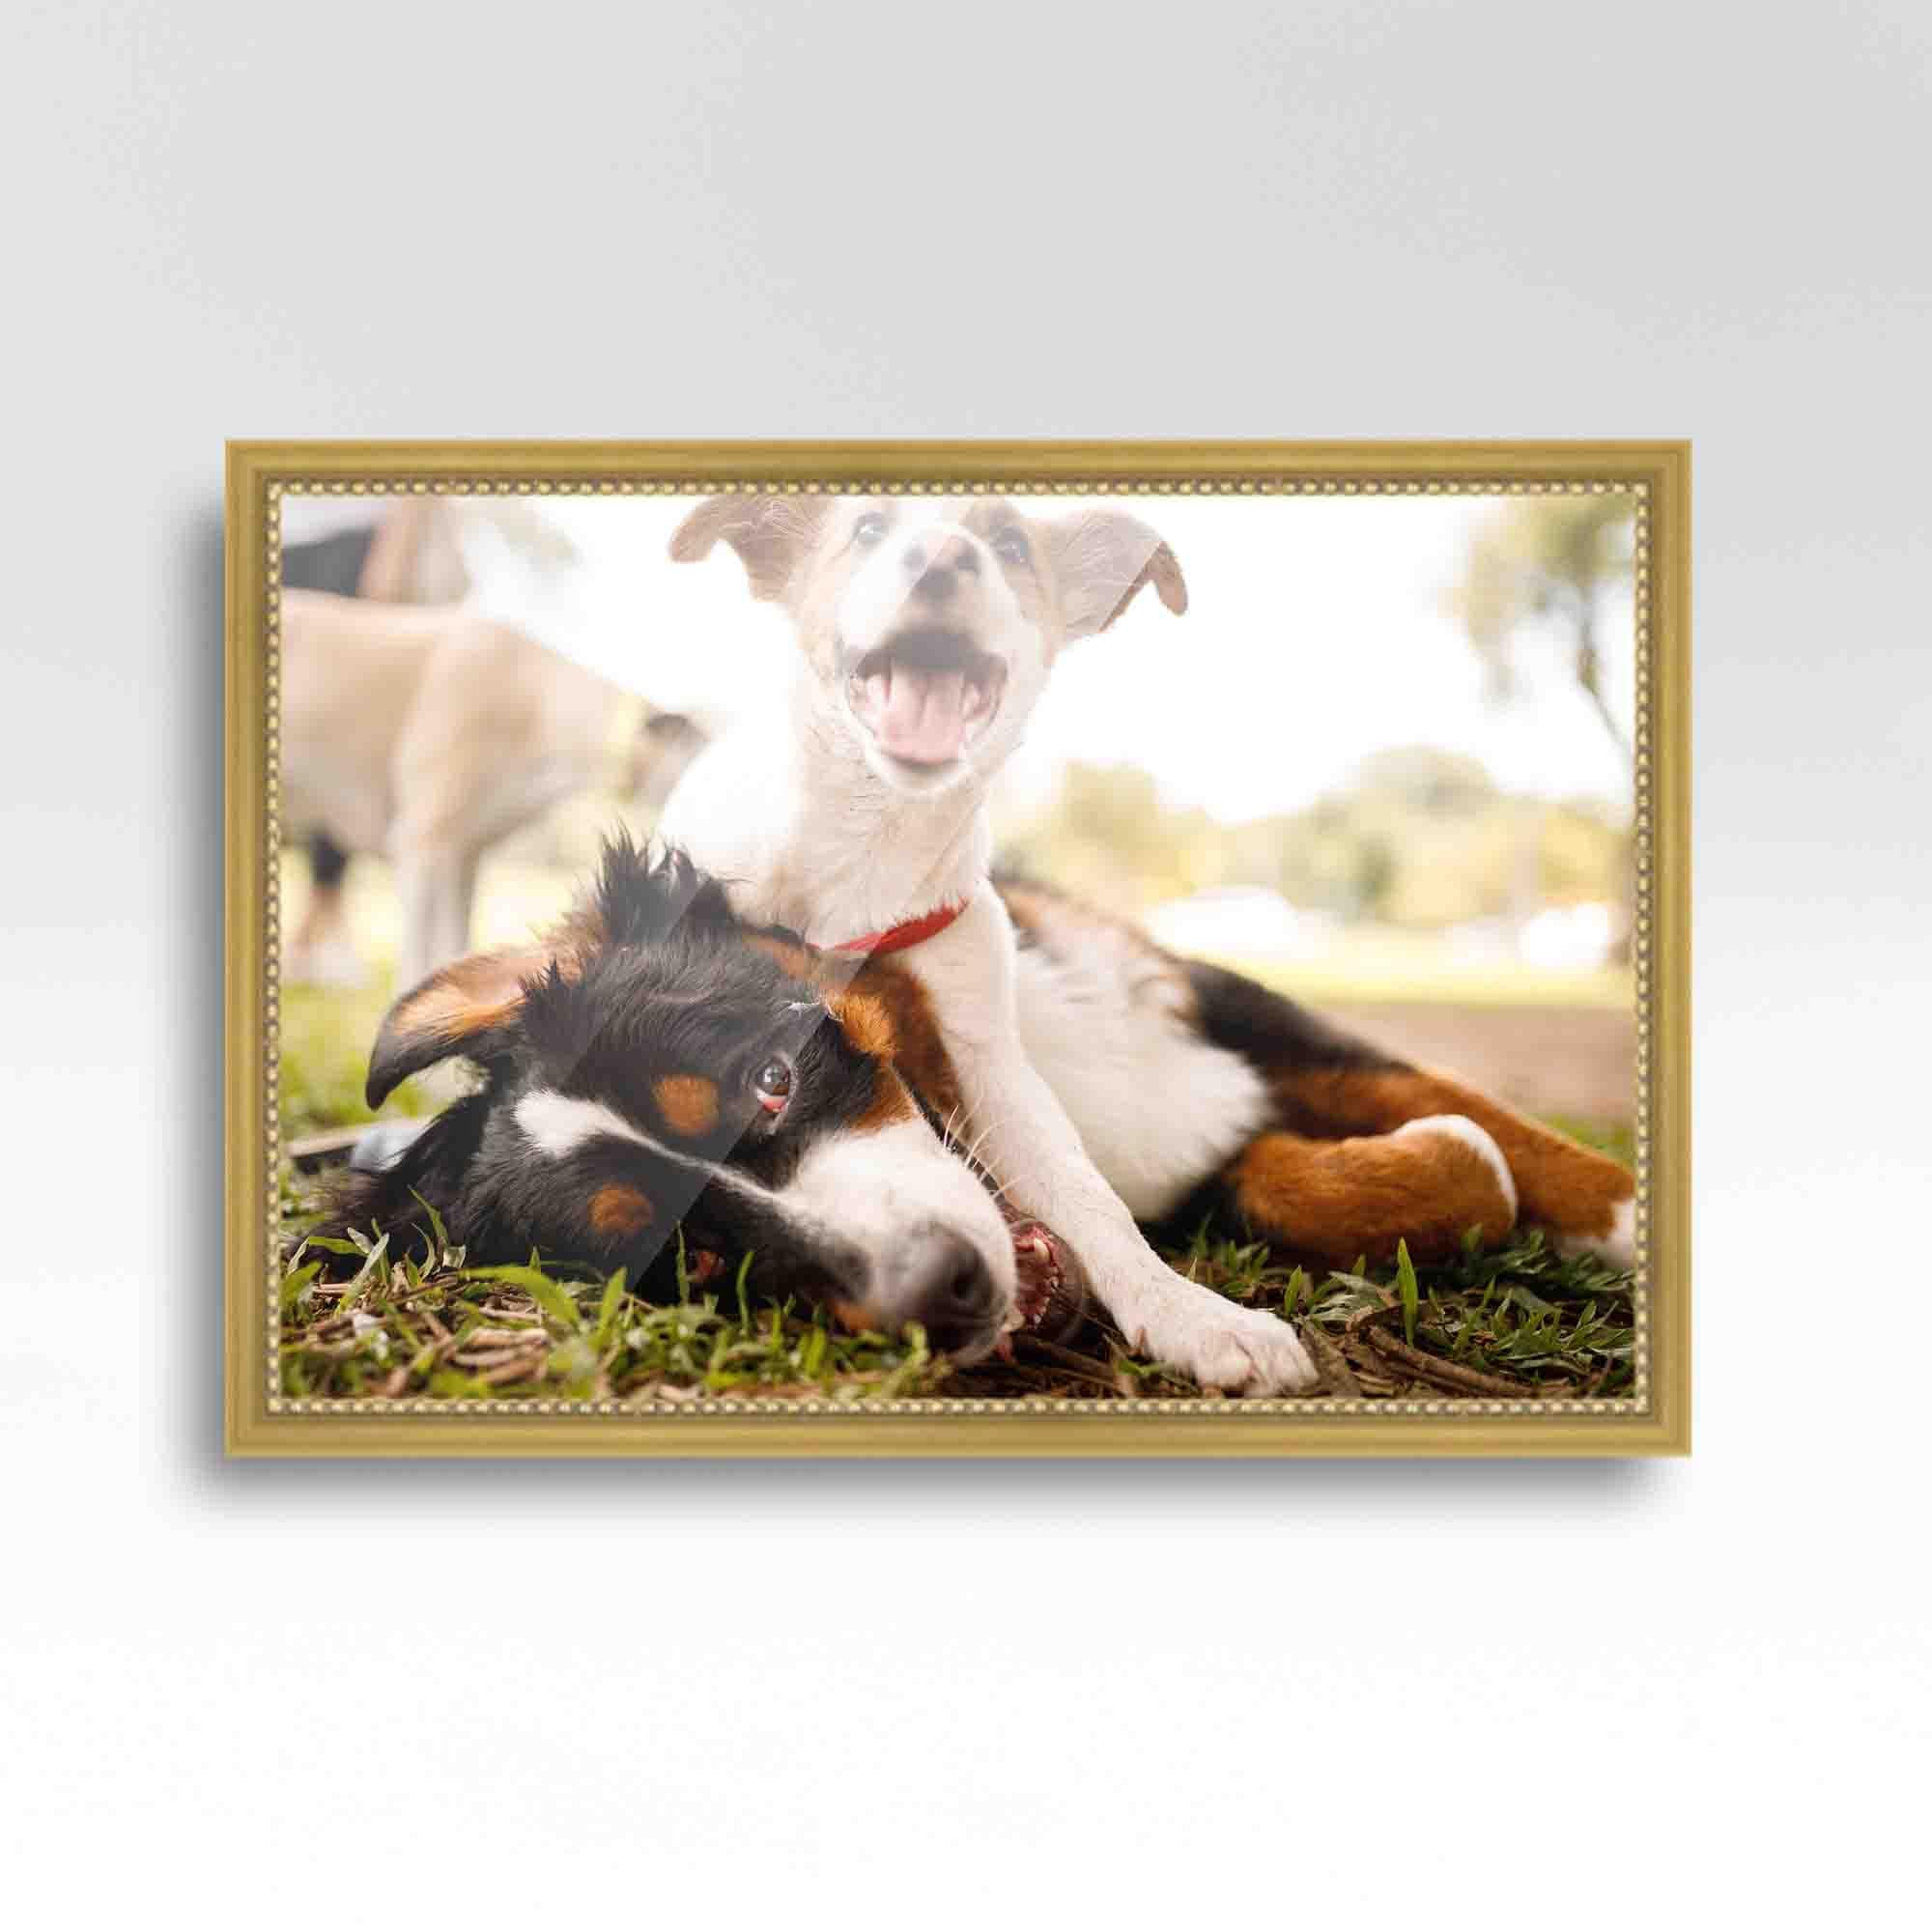 https://ak1.ostkcdn.com/images/products/is/images/direct/0fba4c47855b70d39a4e2bfecb41d83f11e4dc60/22x10-Frame-Gold-Real-Wood-Picture-Frame-Width-0.75-inches-%7C-Interior.jpg